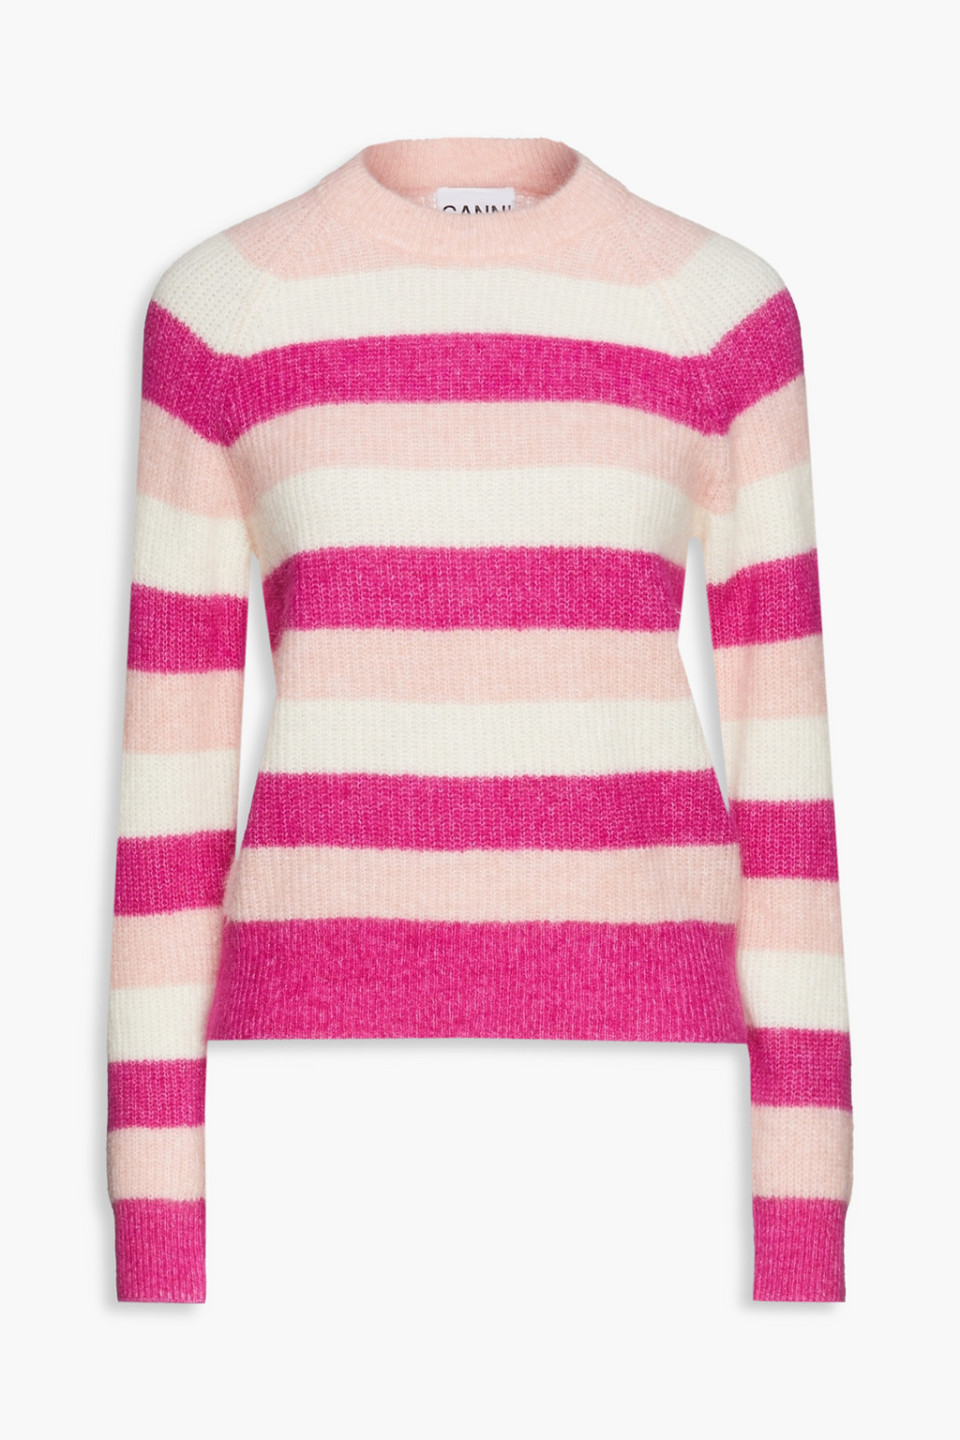 GANNI Striped knitted sweater